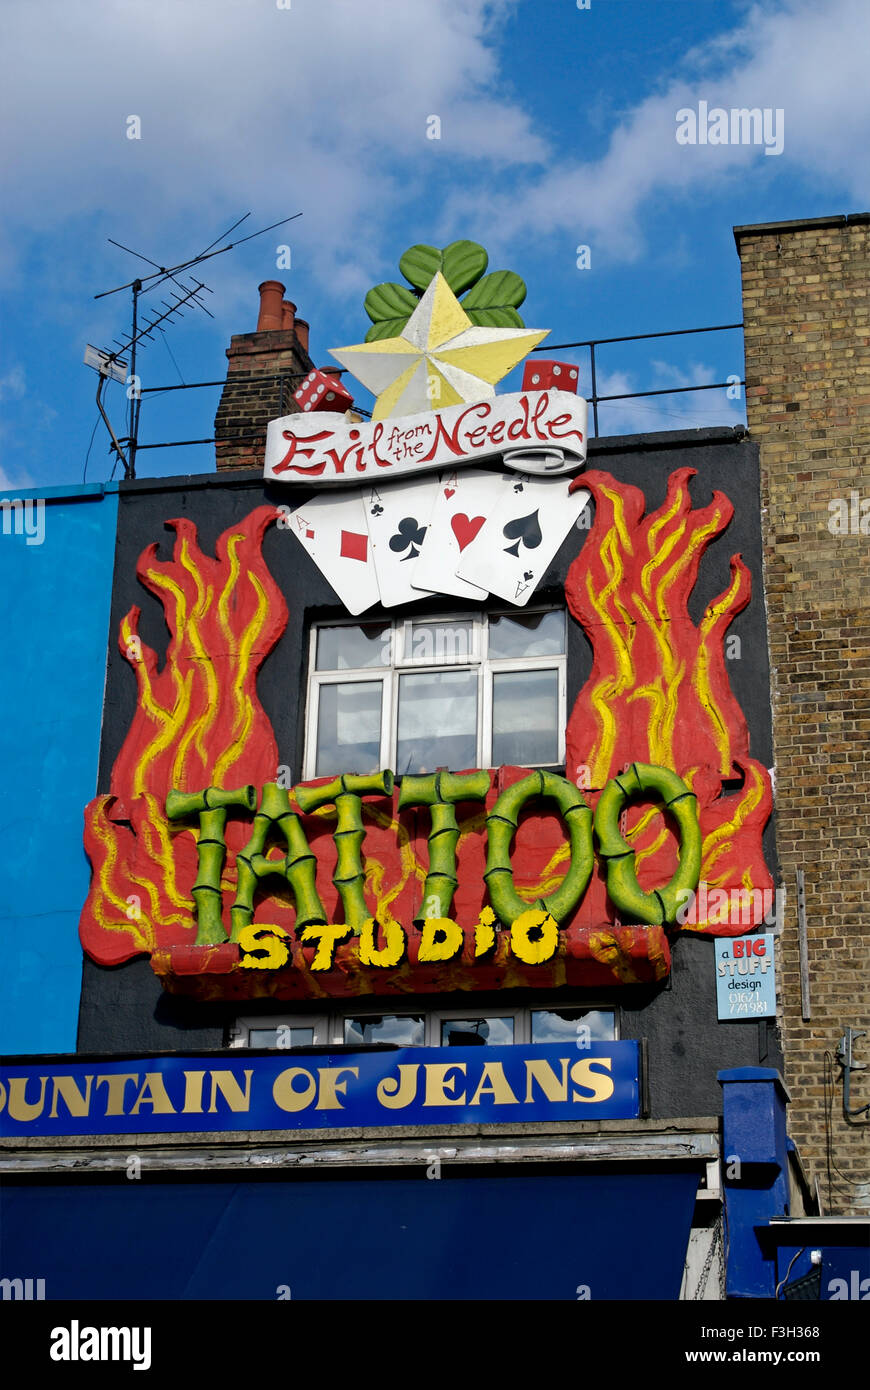 Tattoo Studio, Evil from the Needle, Fountain of Jeans, Camden Town, London, England, United Kingdom, UK Stock Photo